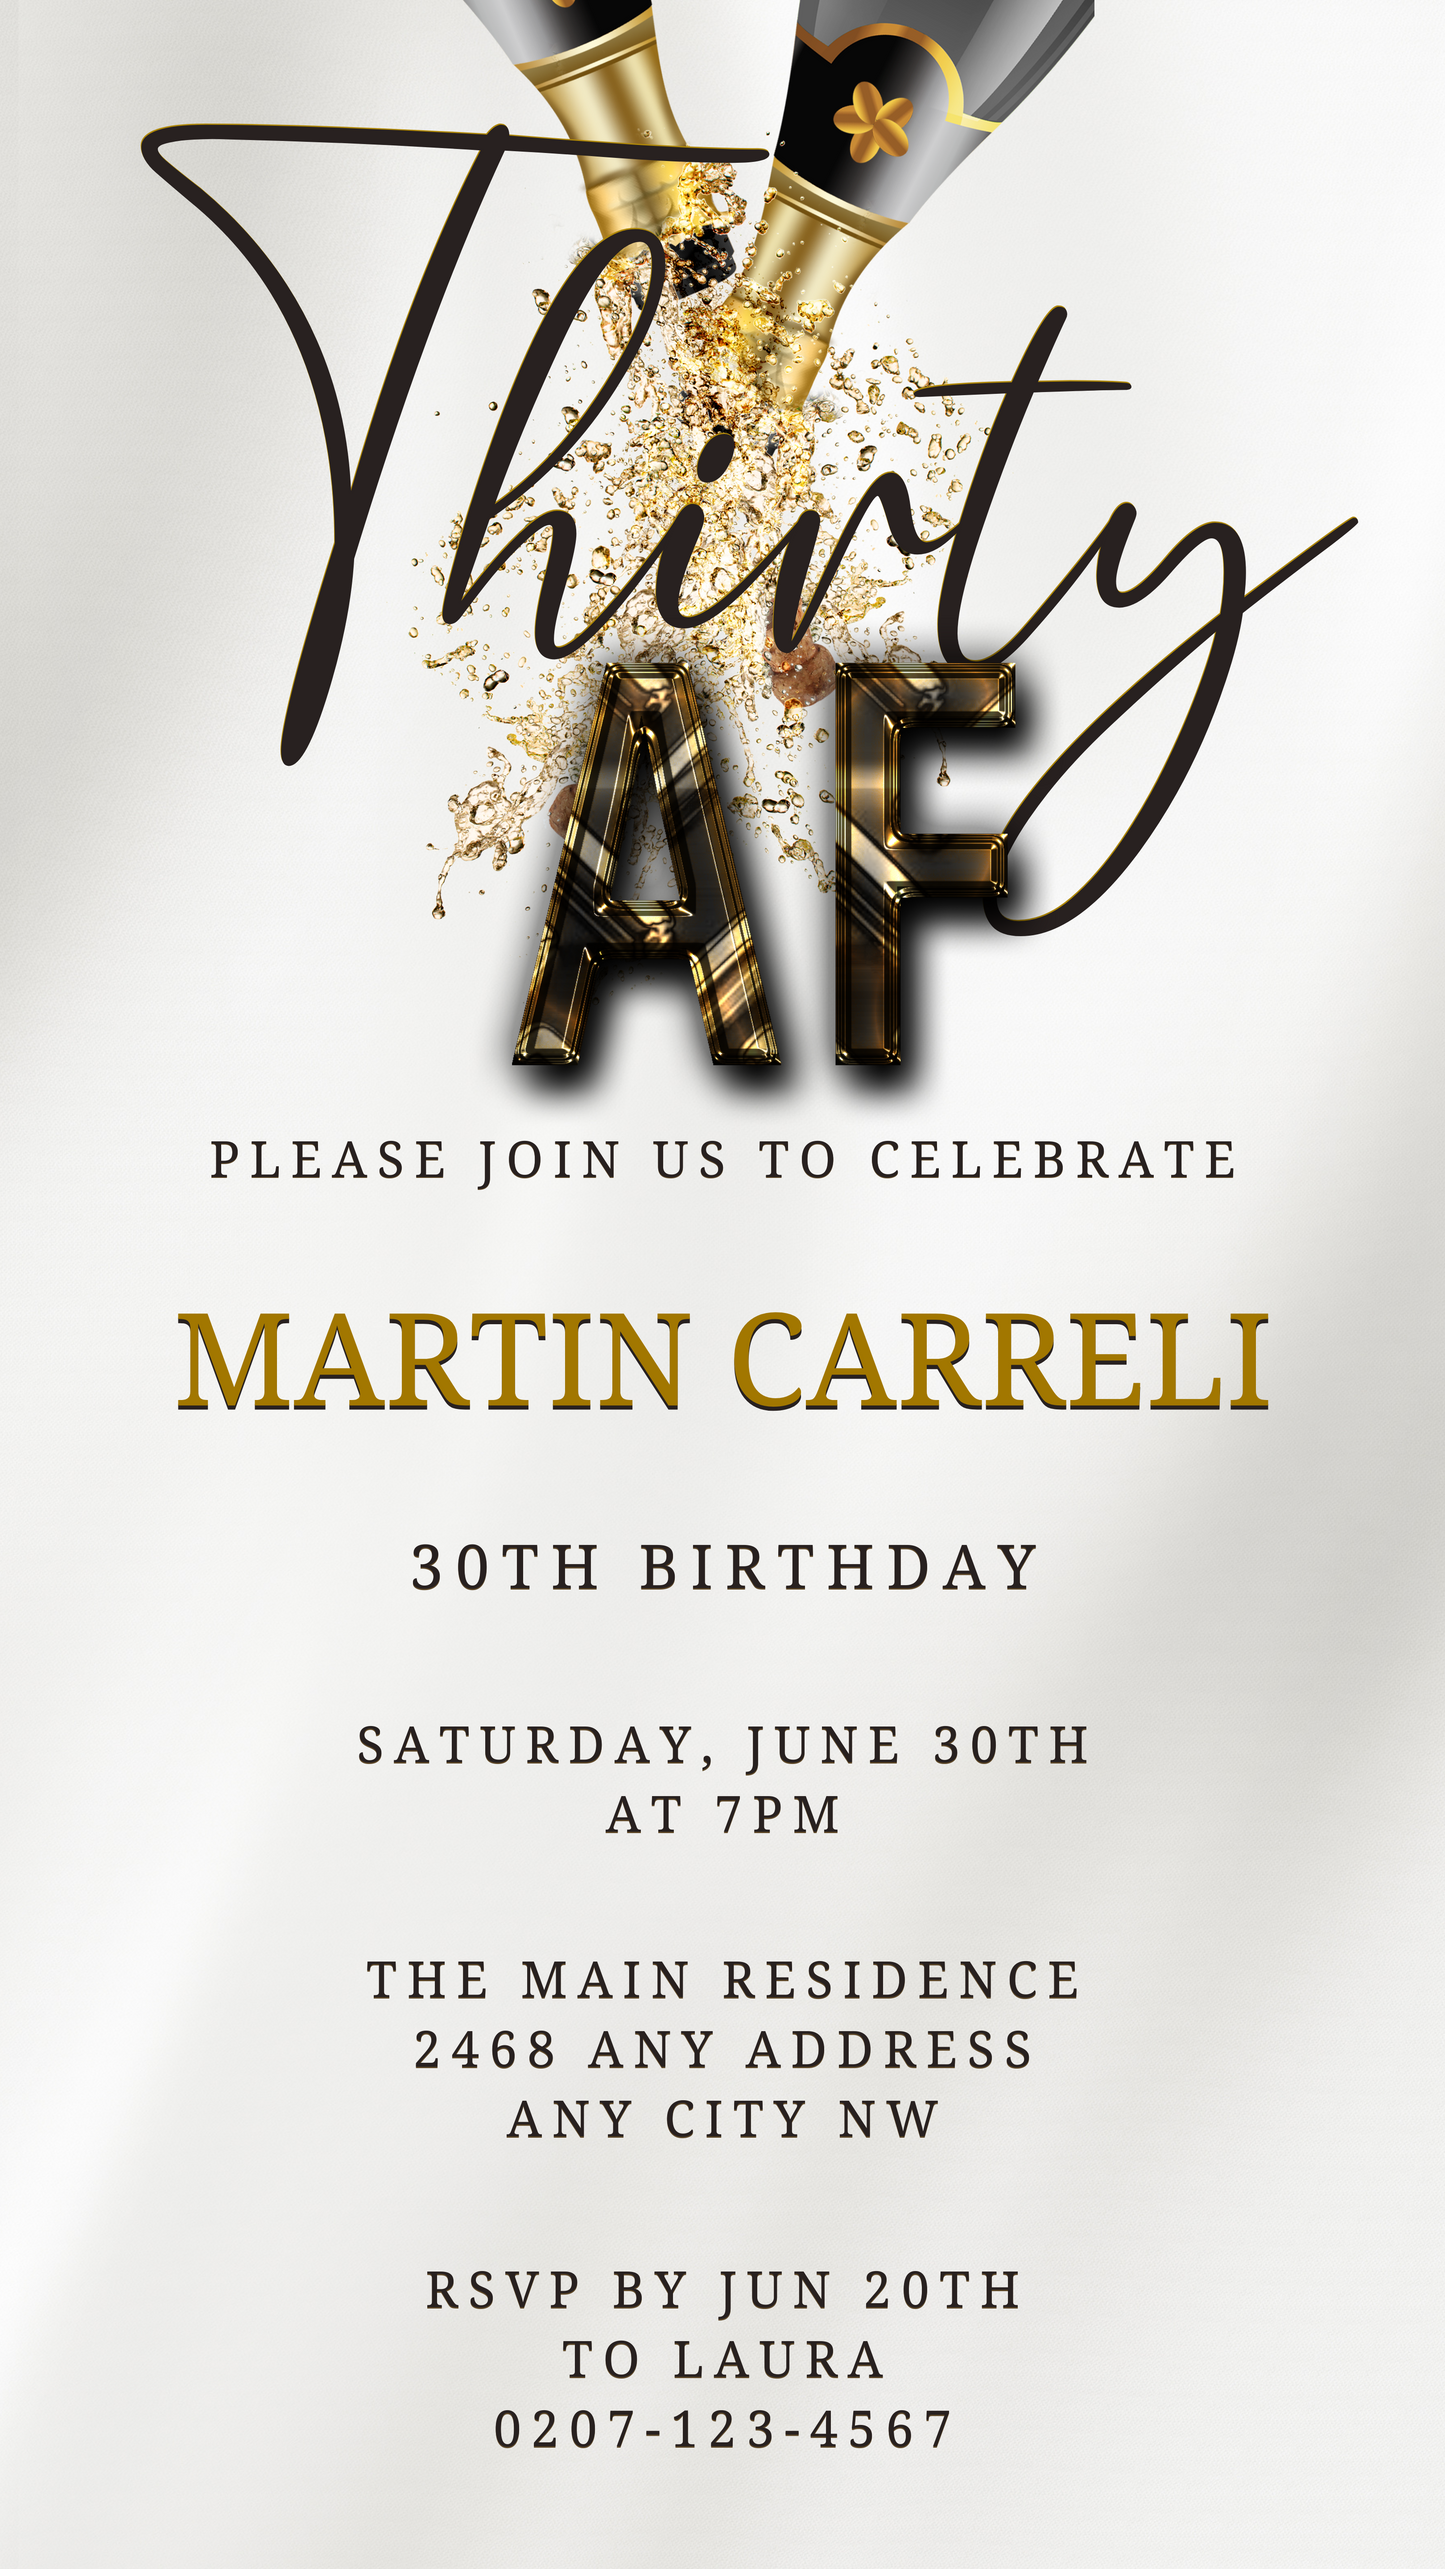 White Gold Champagne | Thirty AF Party Evite: Customizable digital invitation with gold accents and editable text for birthdays, instantly downloadable for smartphones via Canva.